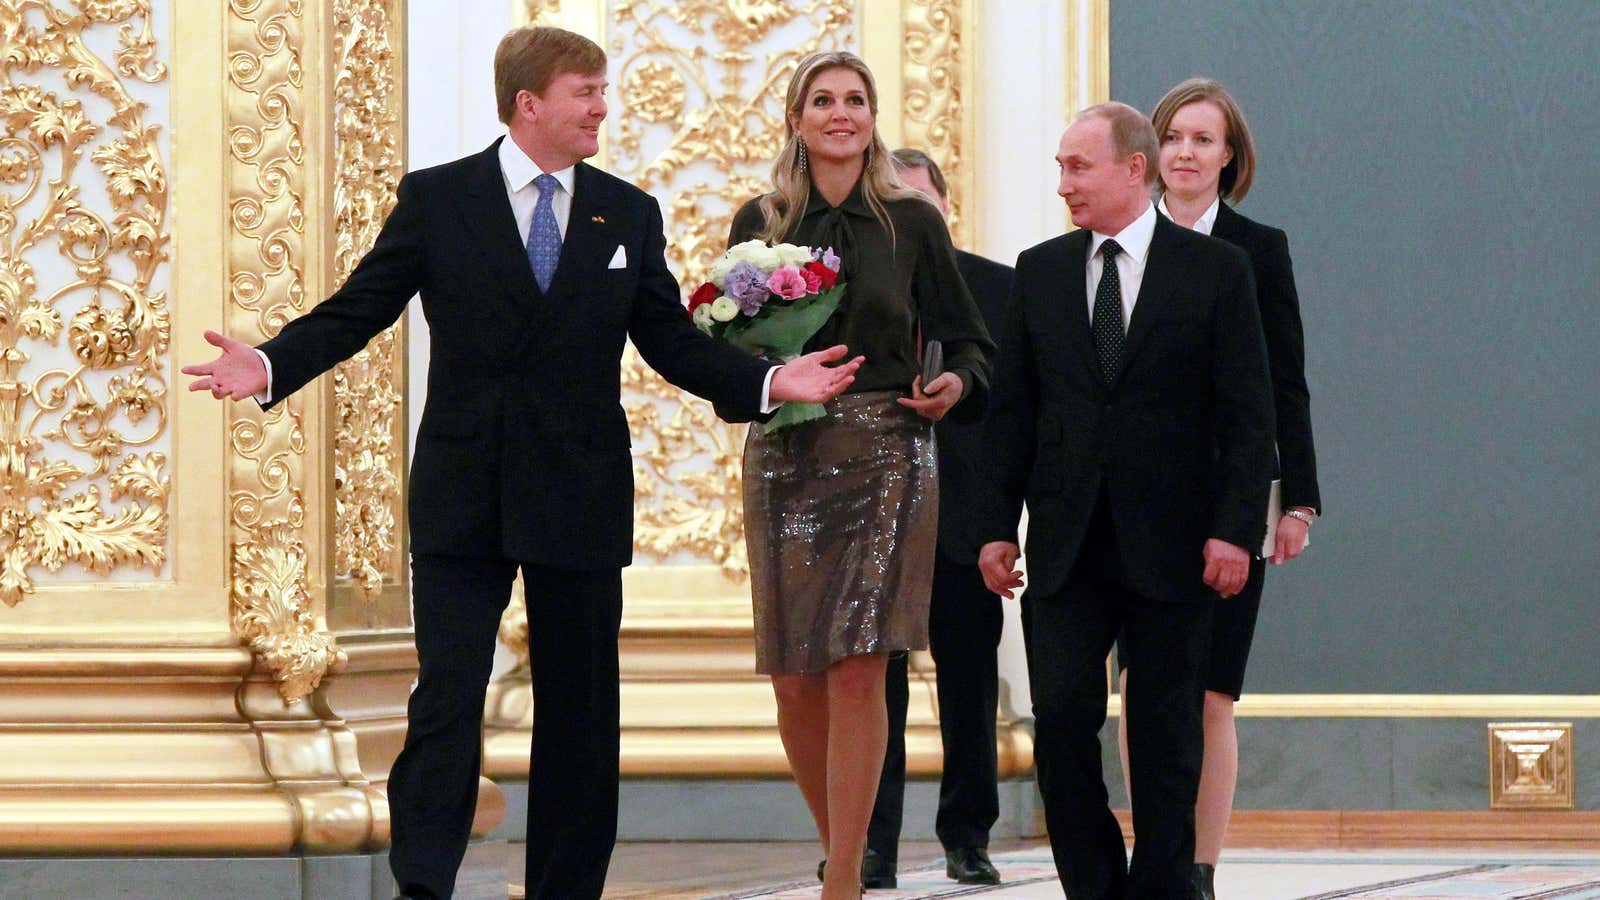 The King and Queen of the Netherlands welcome Vladimir Putin—and Russian investment.